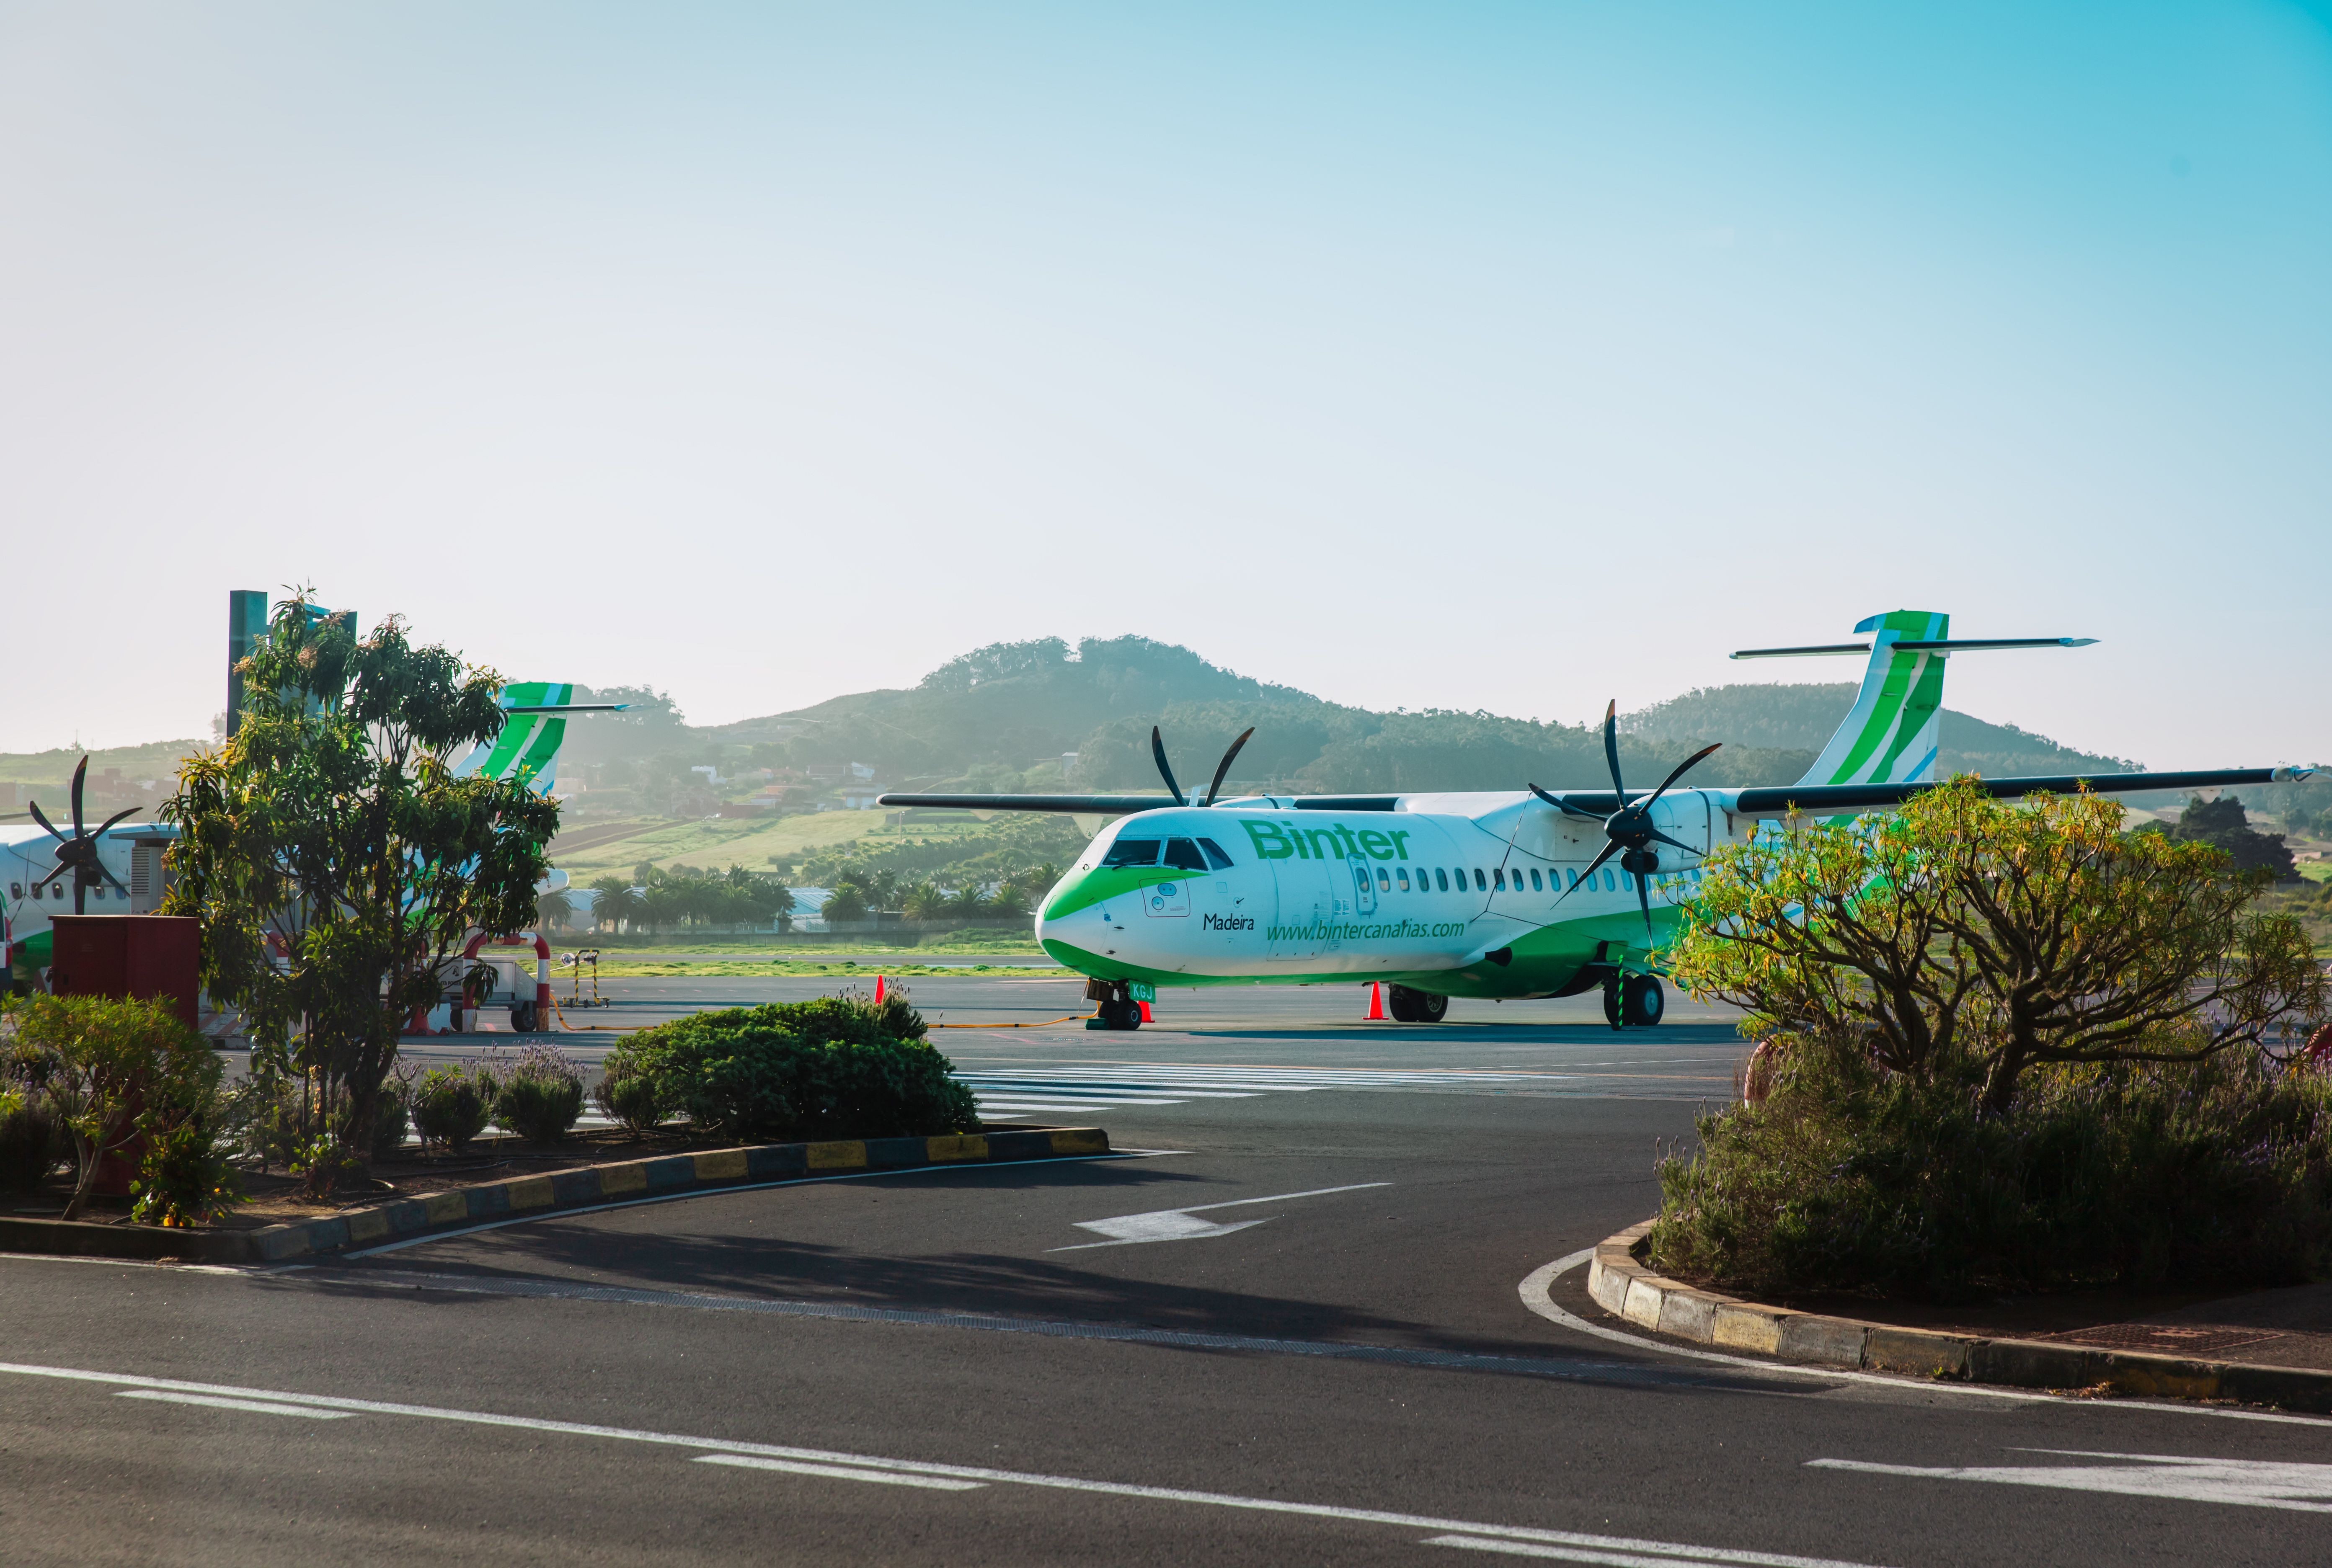 Binter Canarias airlines aircraft parked in Gran Canaria airport, Tenerife, Spain.